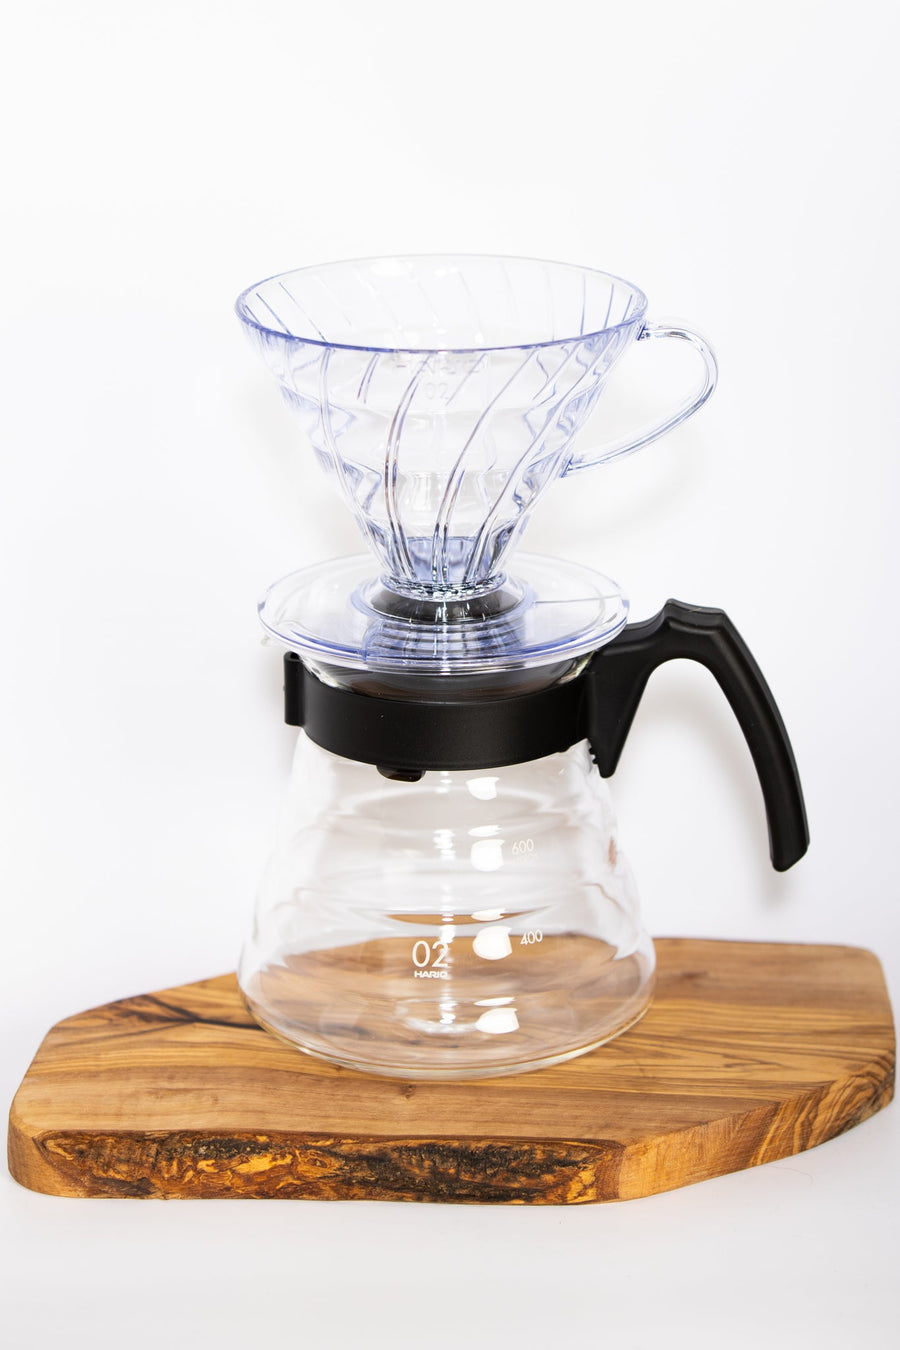 Hario V60 "Craft Coffee Maker" Pour Over Set - Black - Be Good Coffee Co.